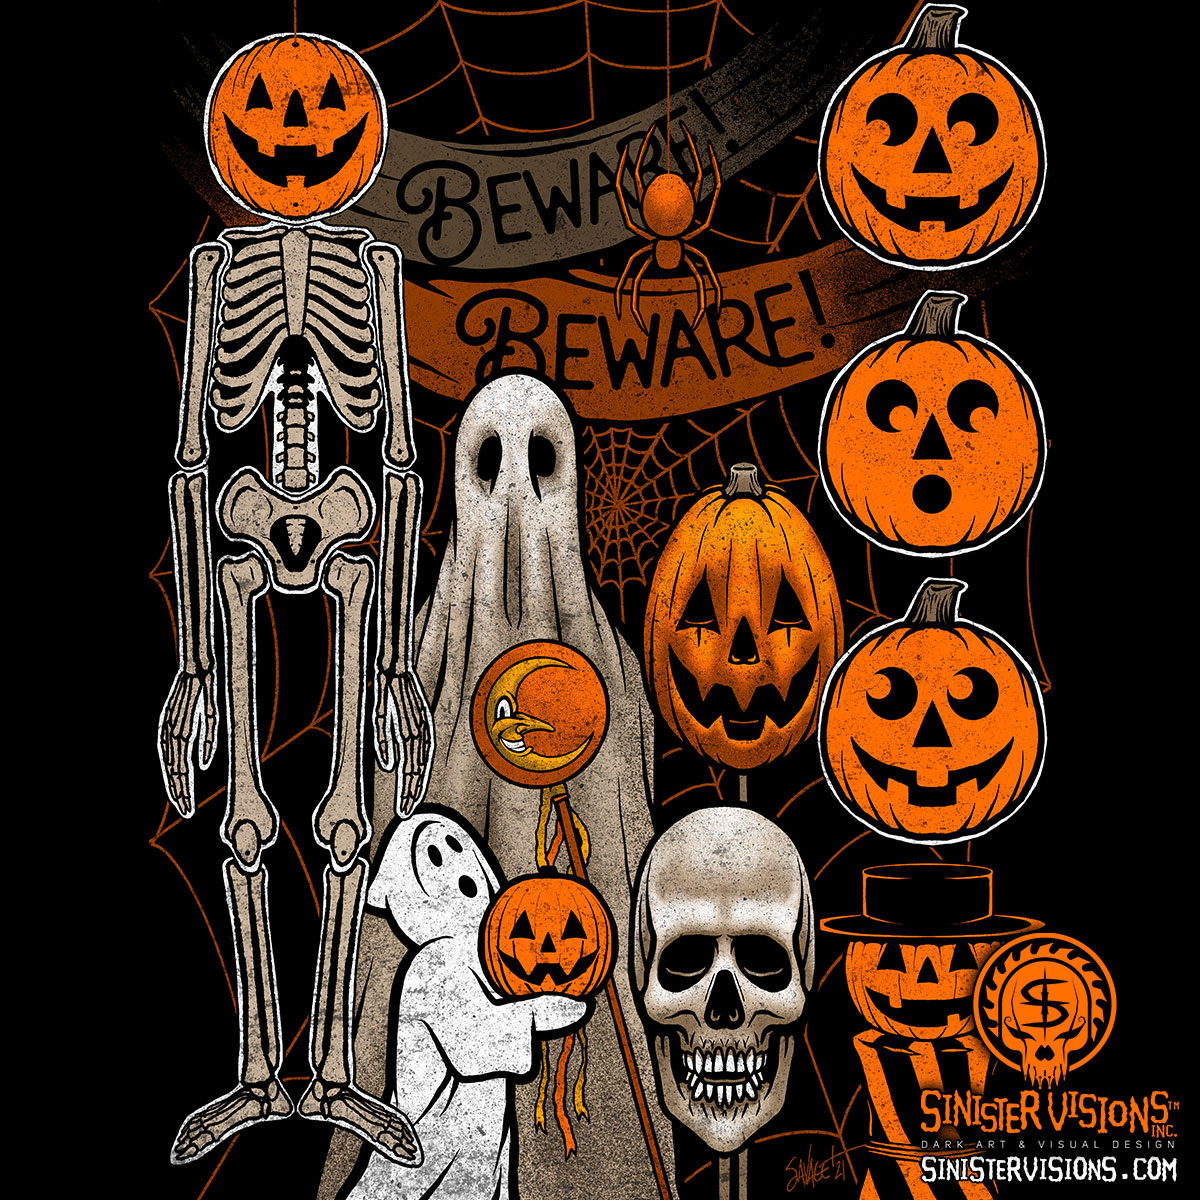 Sinister Visions Inc Completed T Shirt Design For The Halloween Shirt Company, Inspired By Drug Store Halloween Window Displays From The 40's And 50's An Eye On Their